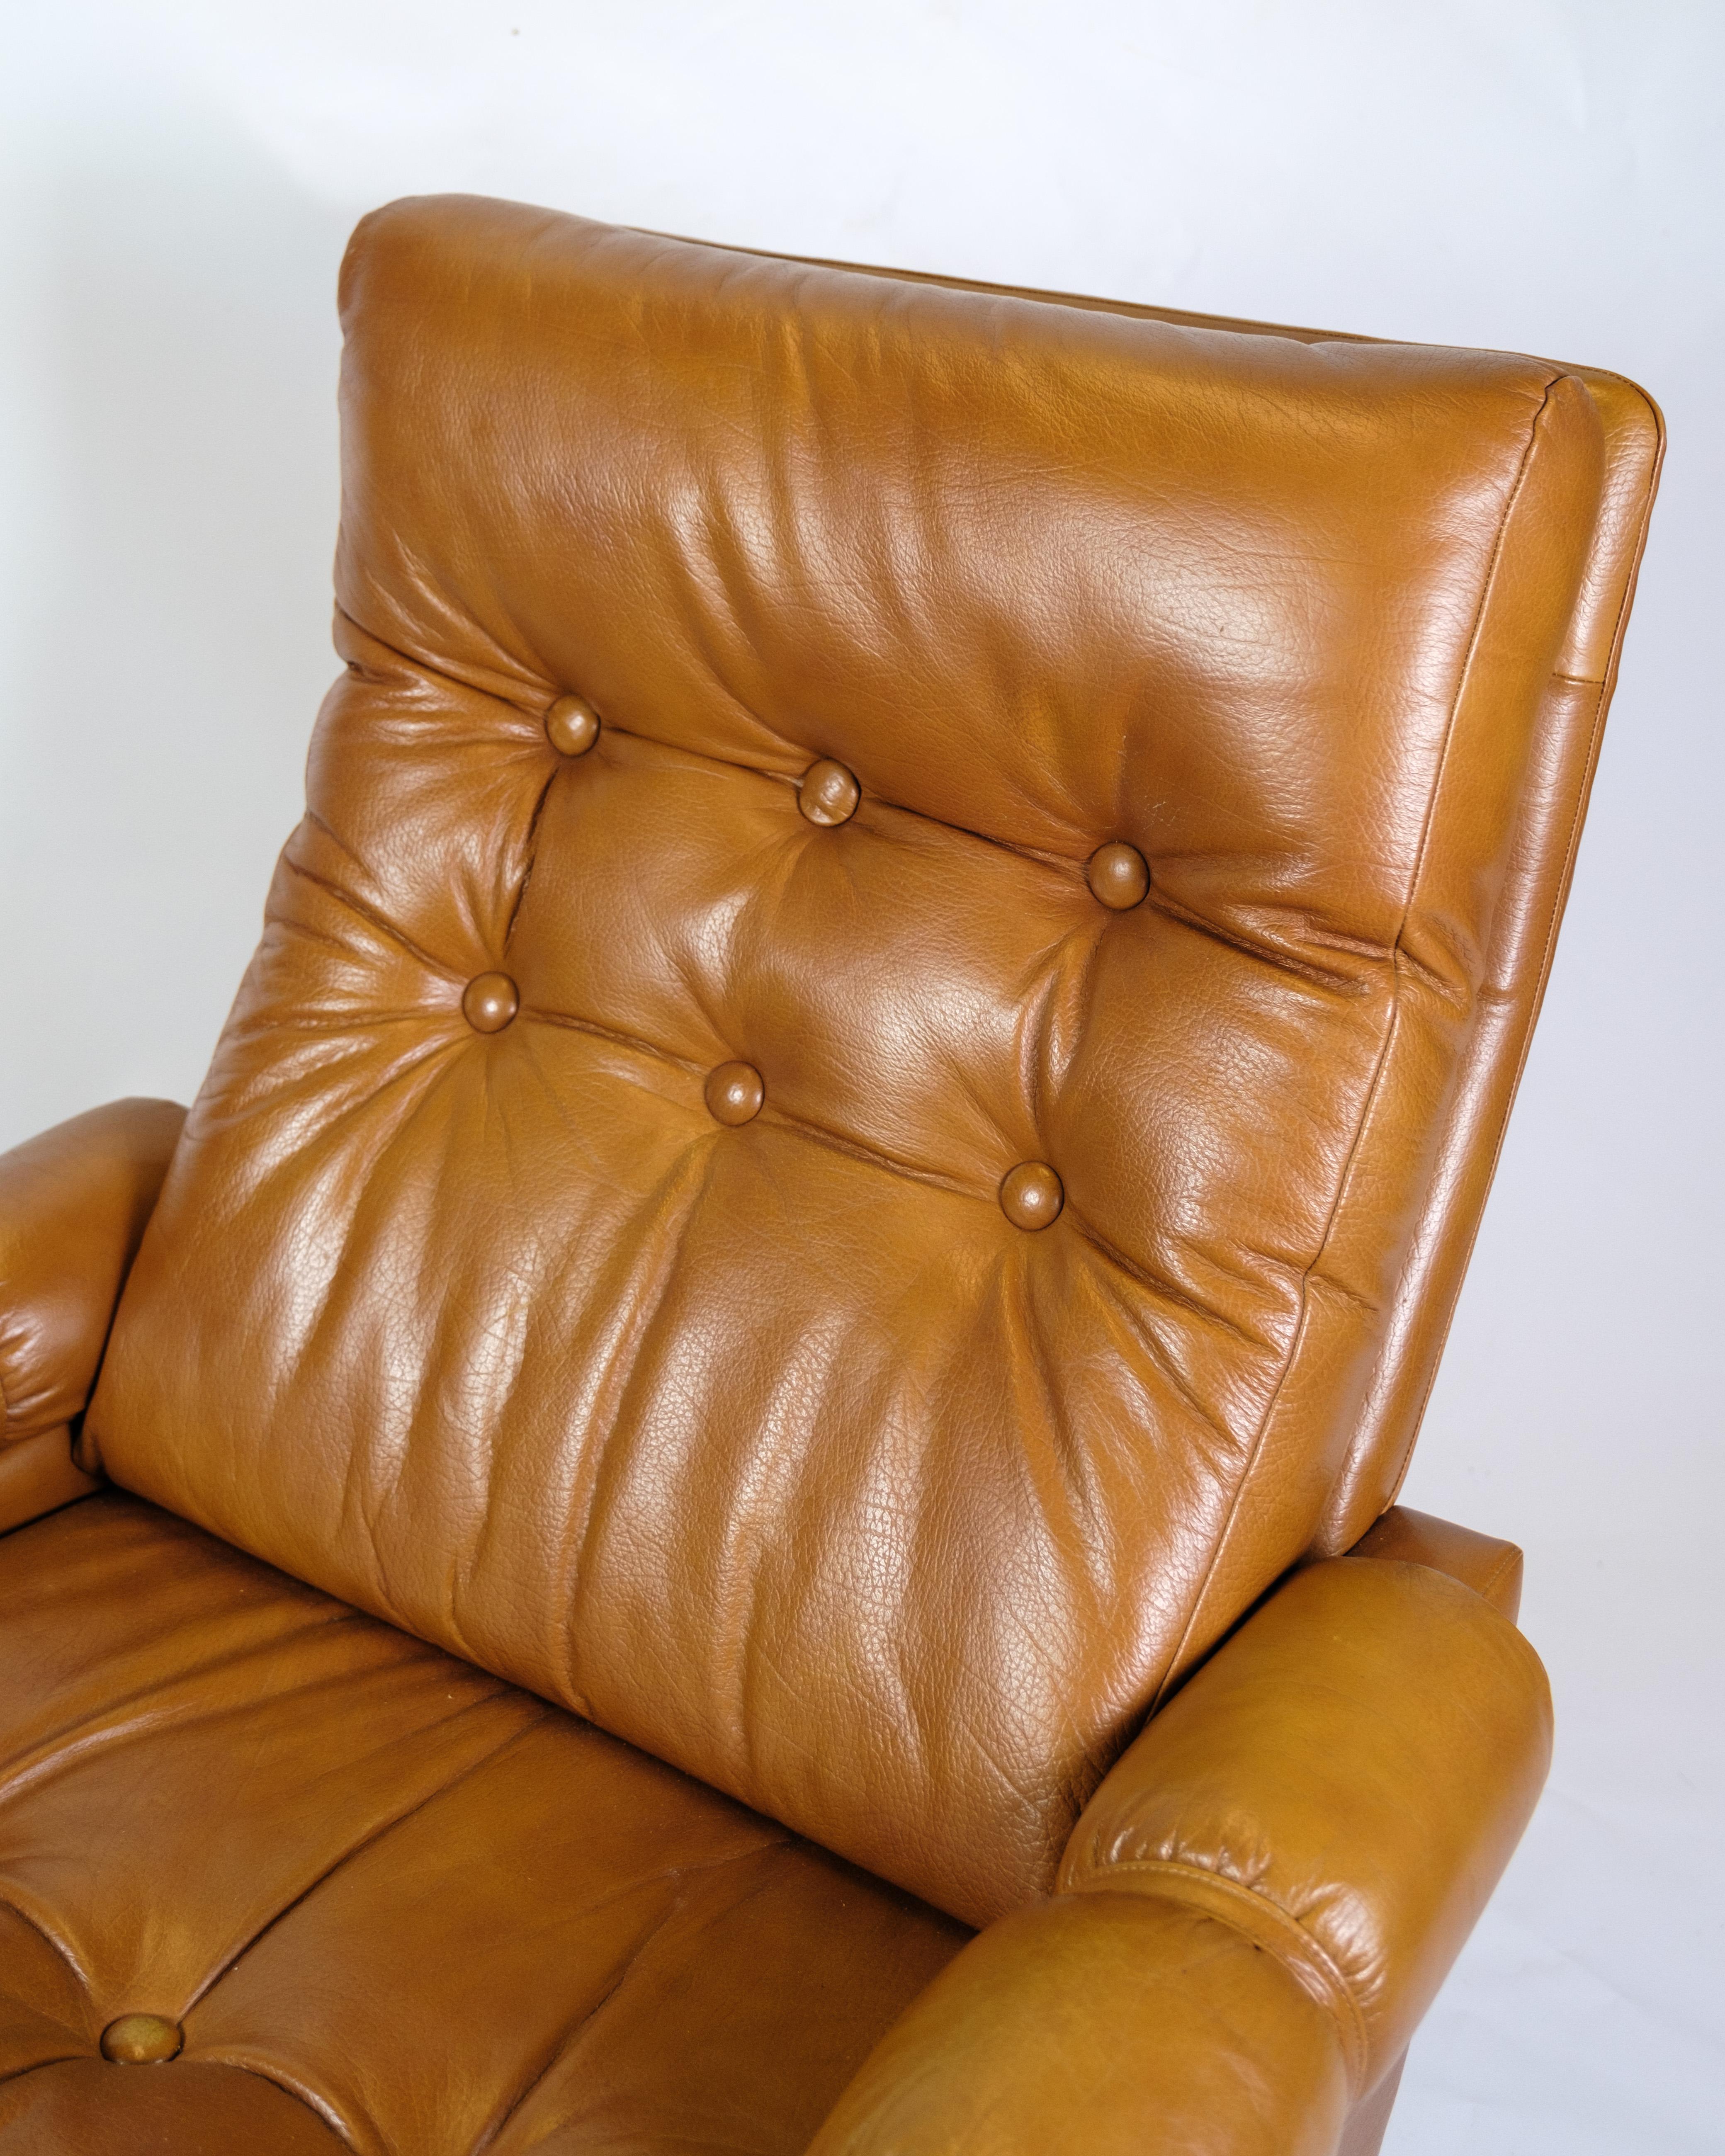 The armchair in cognac leather, an example of Danish design from the 1980s, radiates both comfort and style. The warm, rich color of the cognac leather gives the chair a sophisticated look, while the soft leather adds a luxurious feel to any